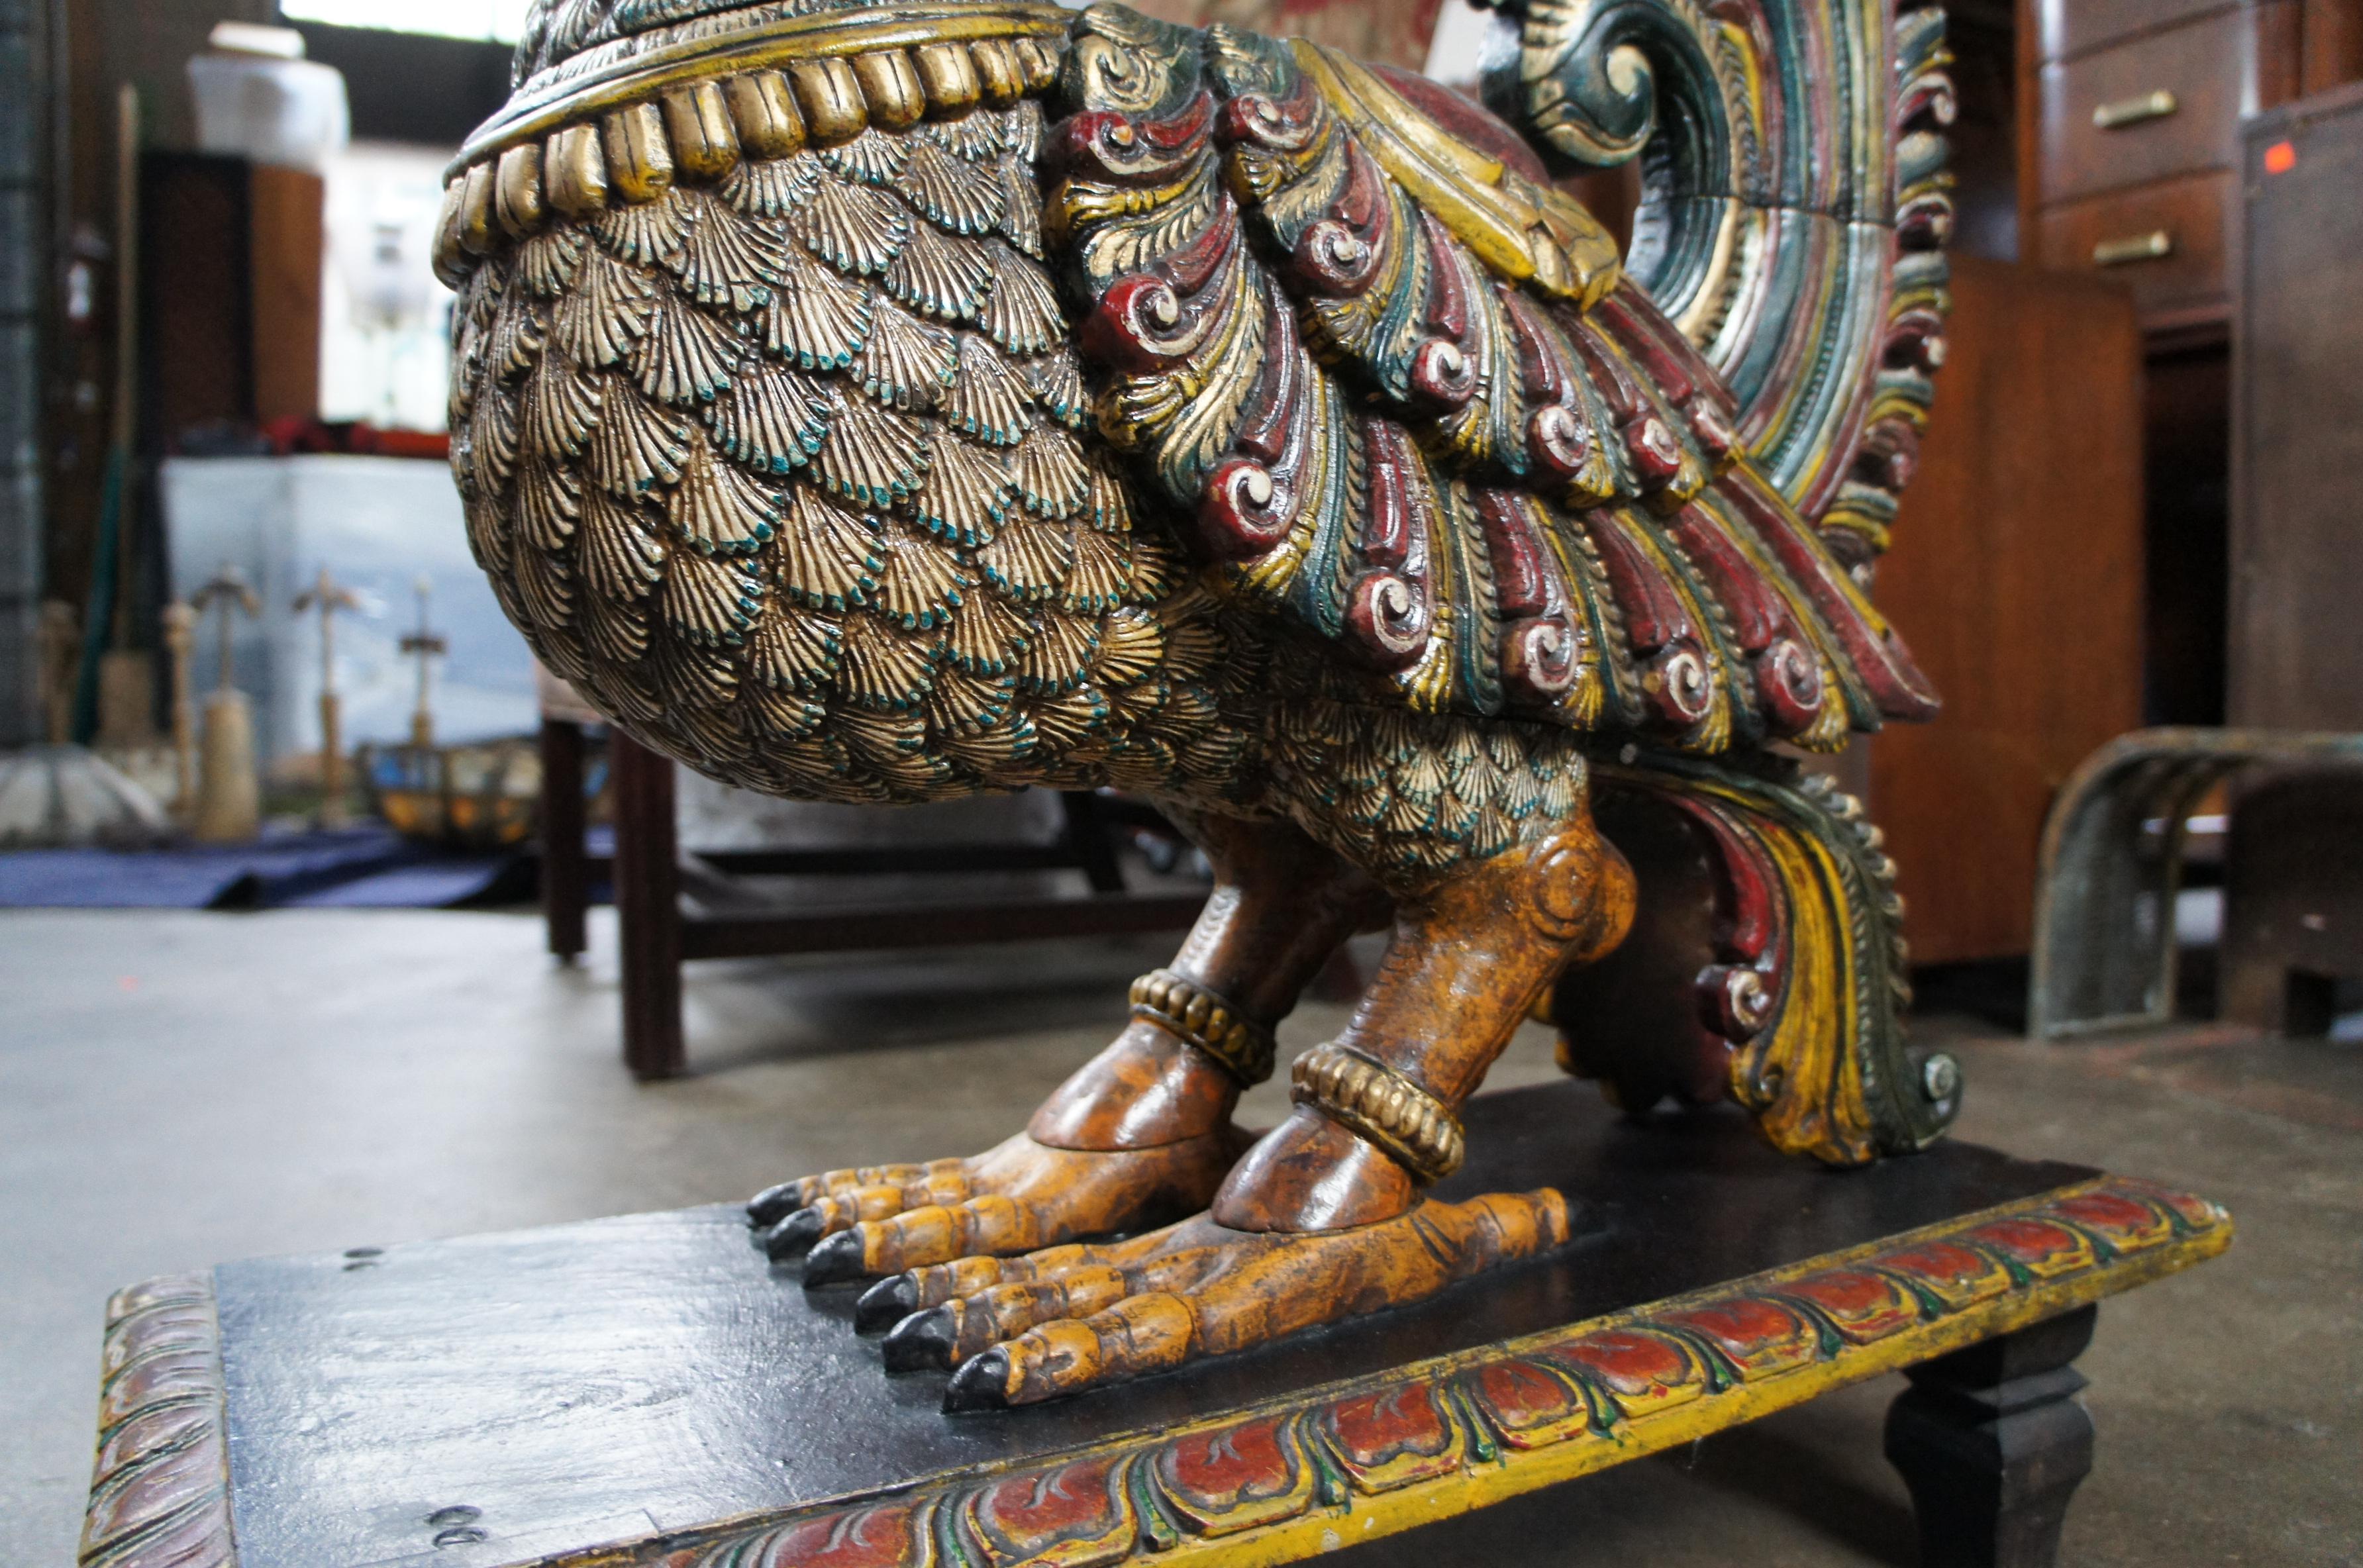 Hardwood 20th C. South Indian Life Sized Carved Peacock Sculpture Statue Folk Art For Sale